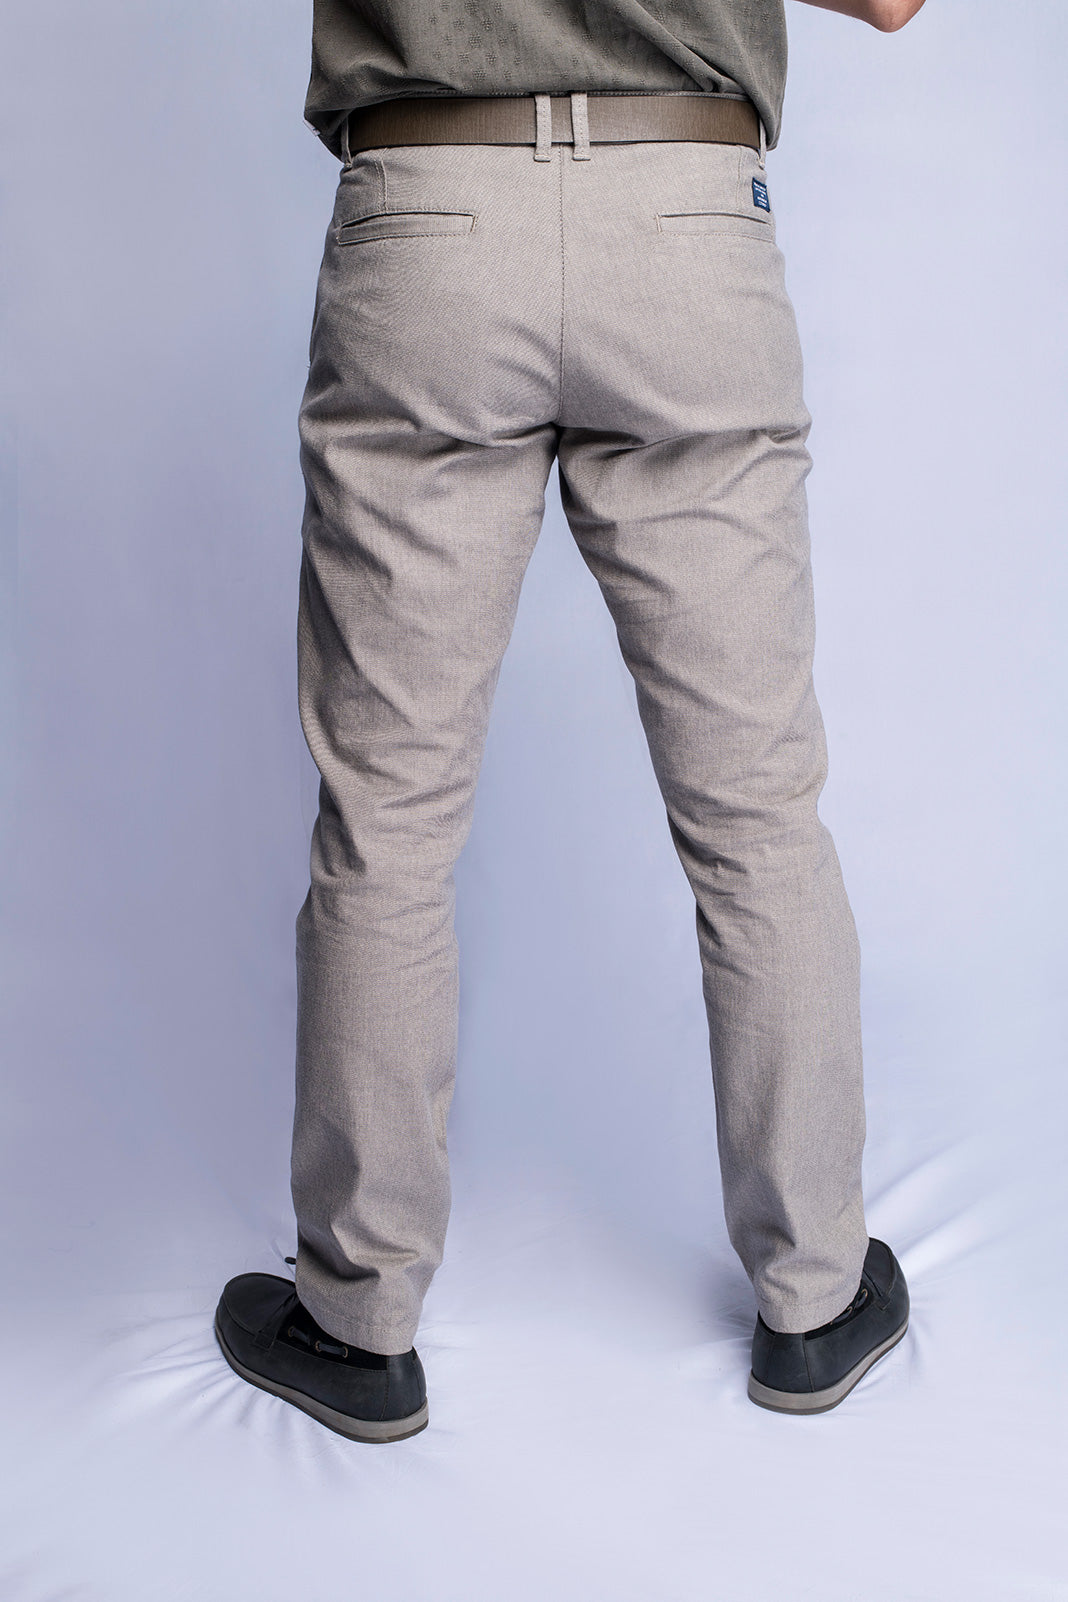 Andrew Smith Celana Panjang Chinos Slim Fit Pria A0030X05A